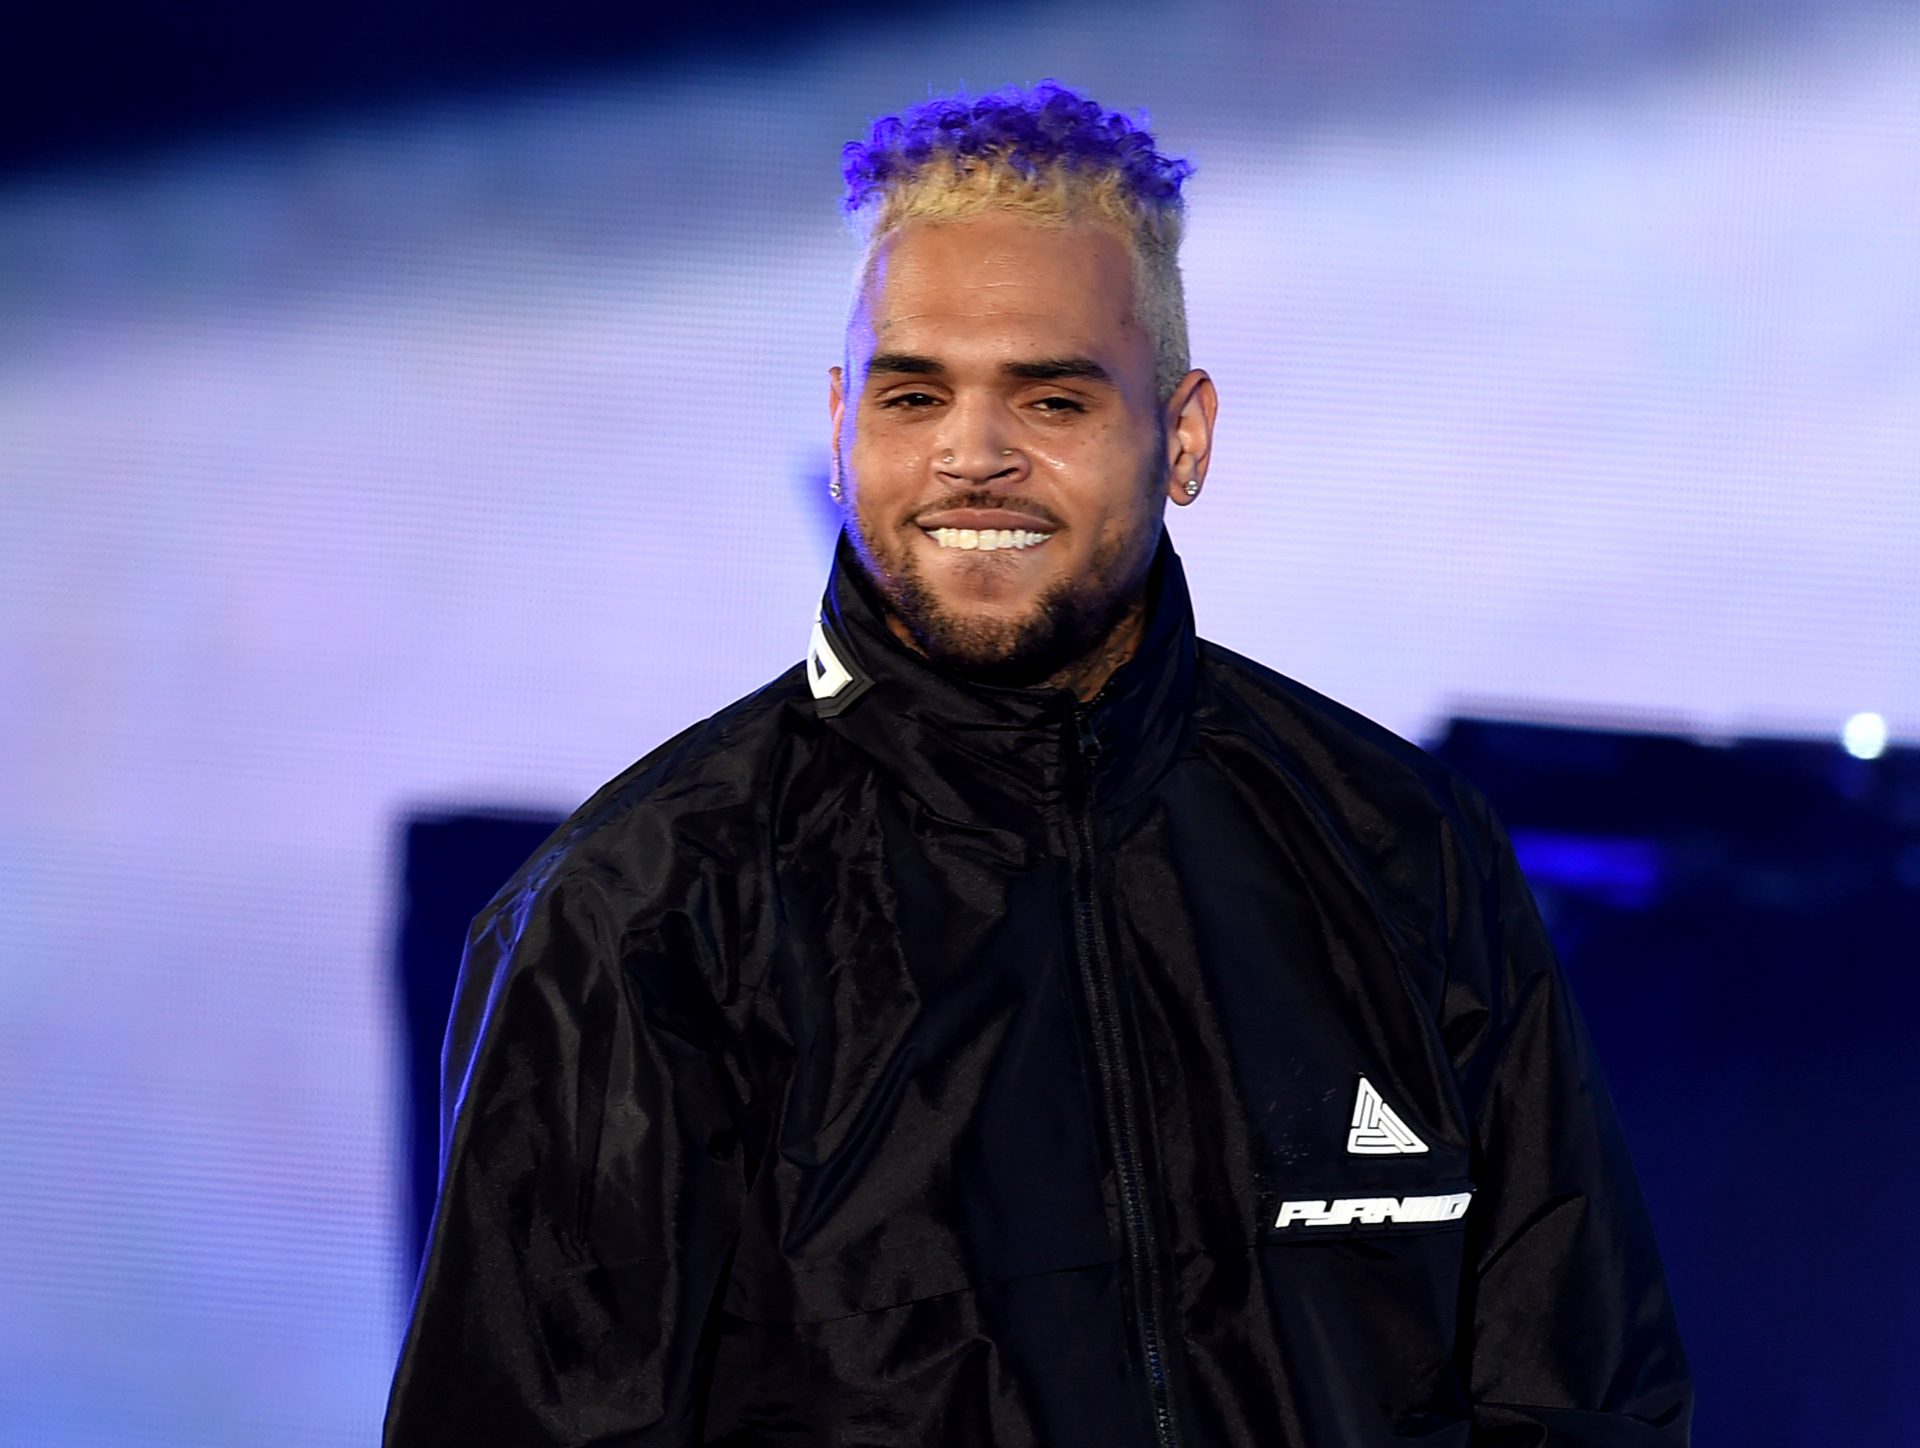 Chris Brown shares the official release date and list of artists for his upcoming album "Breezy," dropping next month.